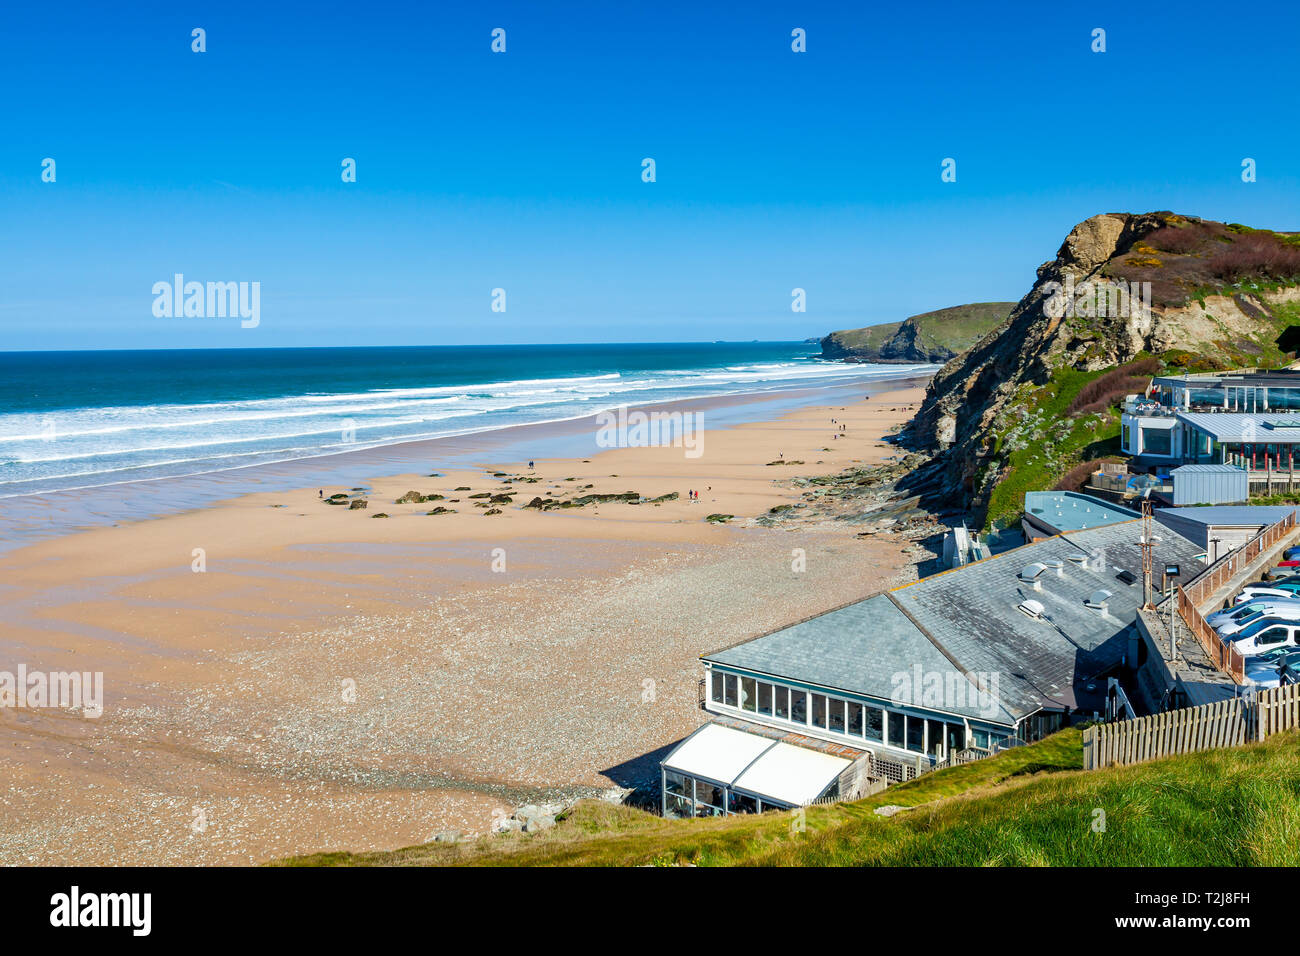 On the coast path overlooking the golden sandy beach at Watergate Bay near Newquay Cornwall England UK Europe Stock Photo